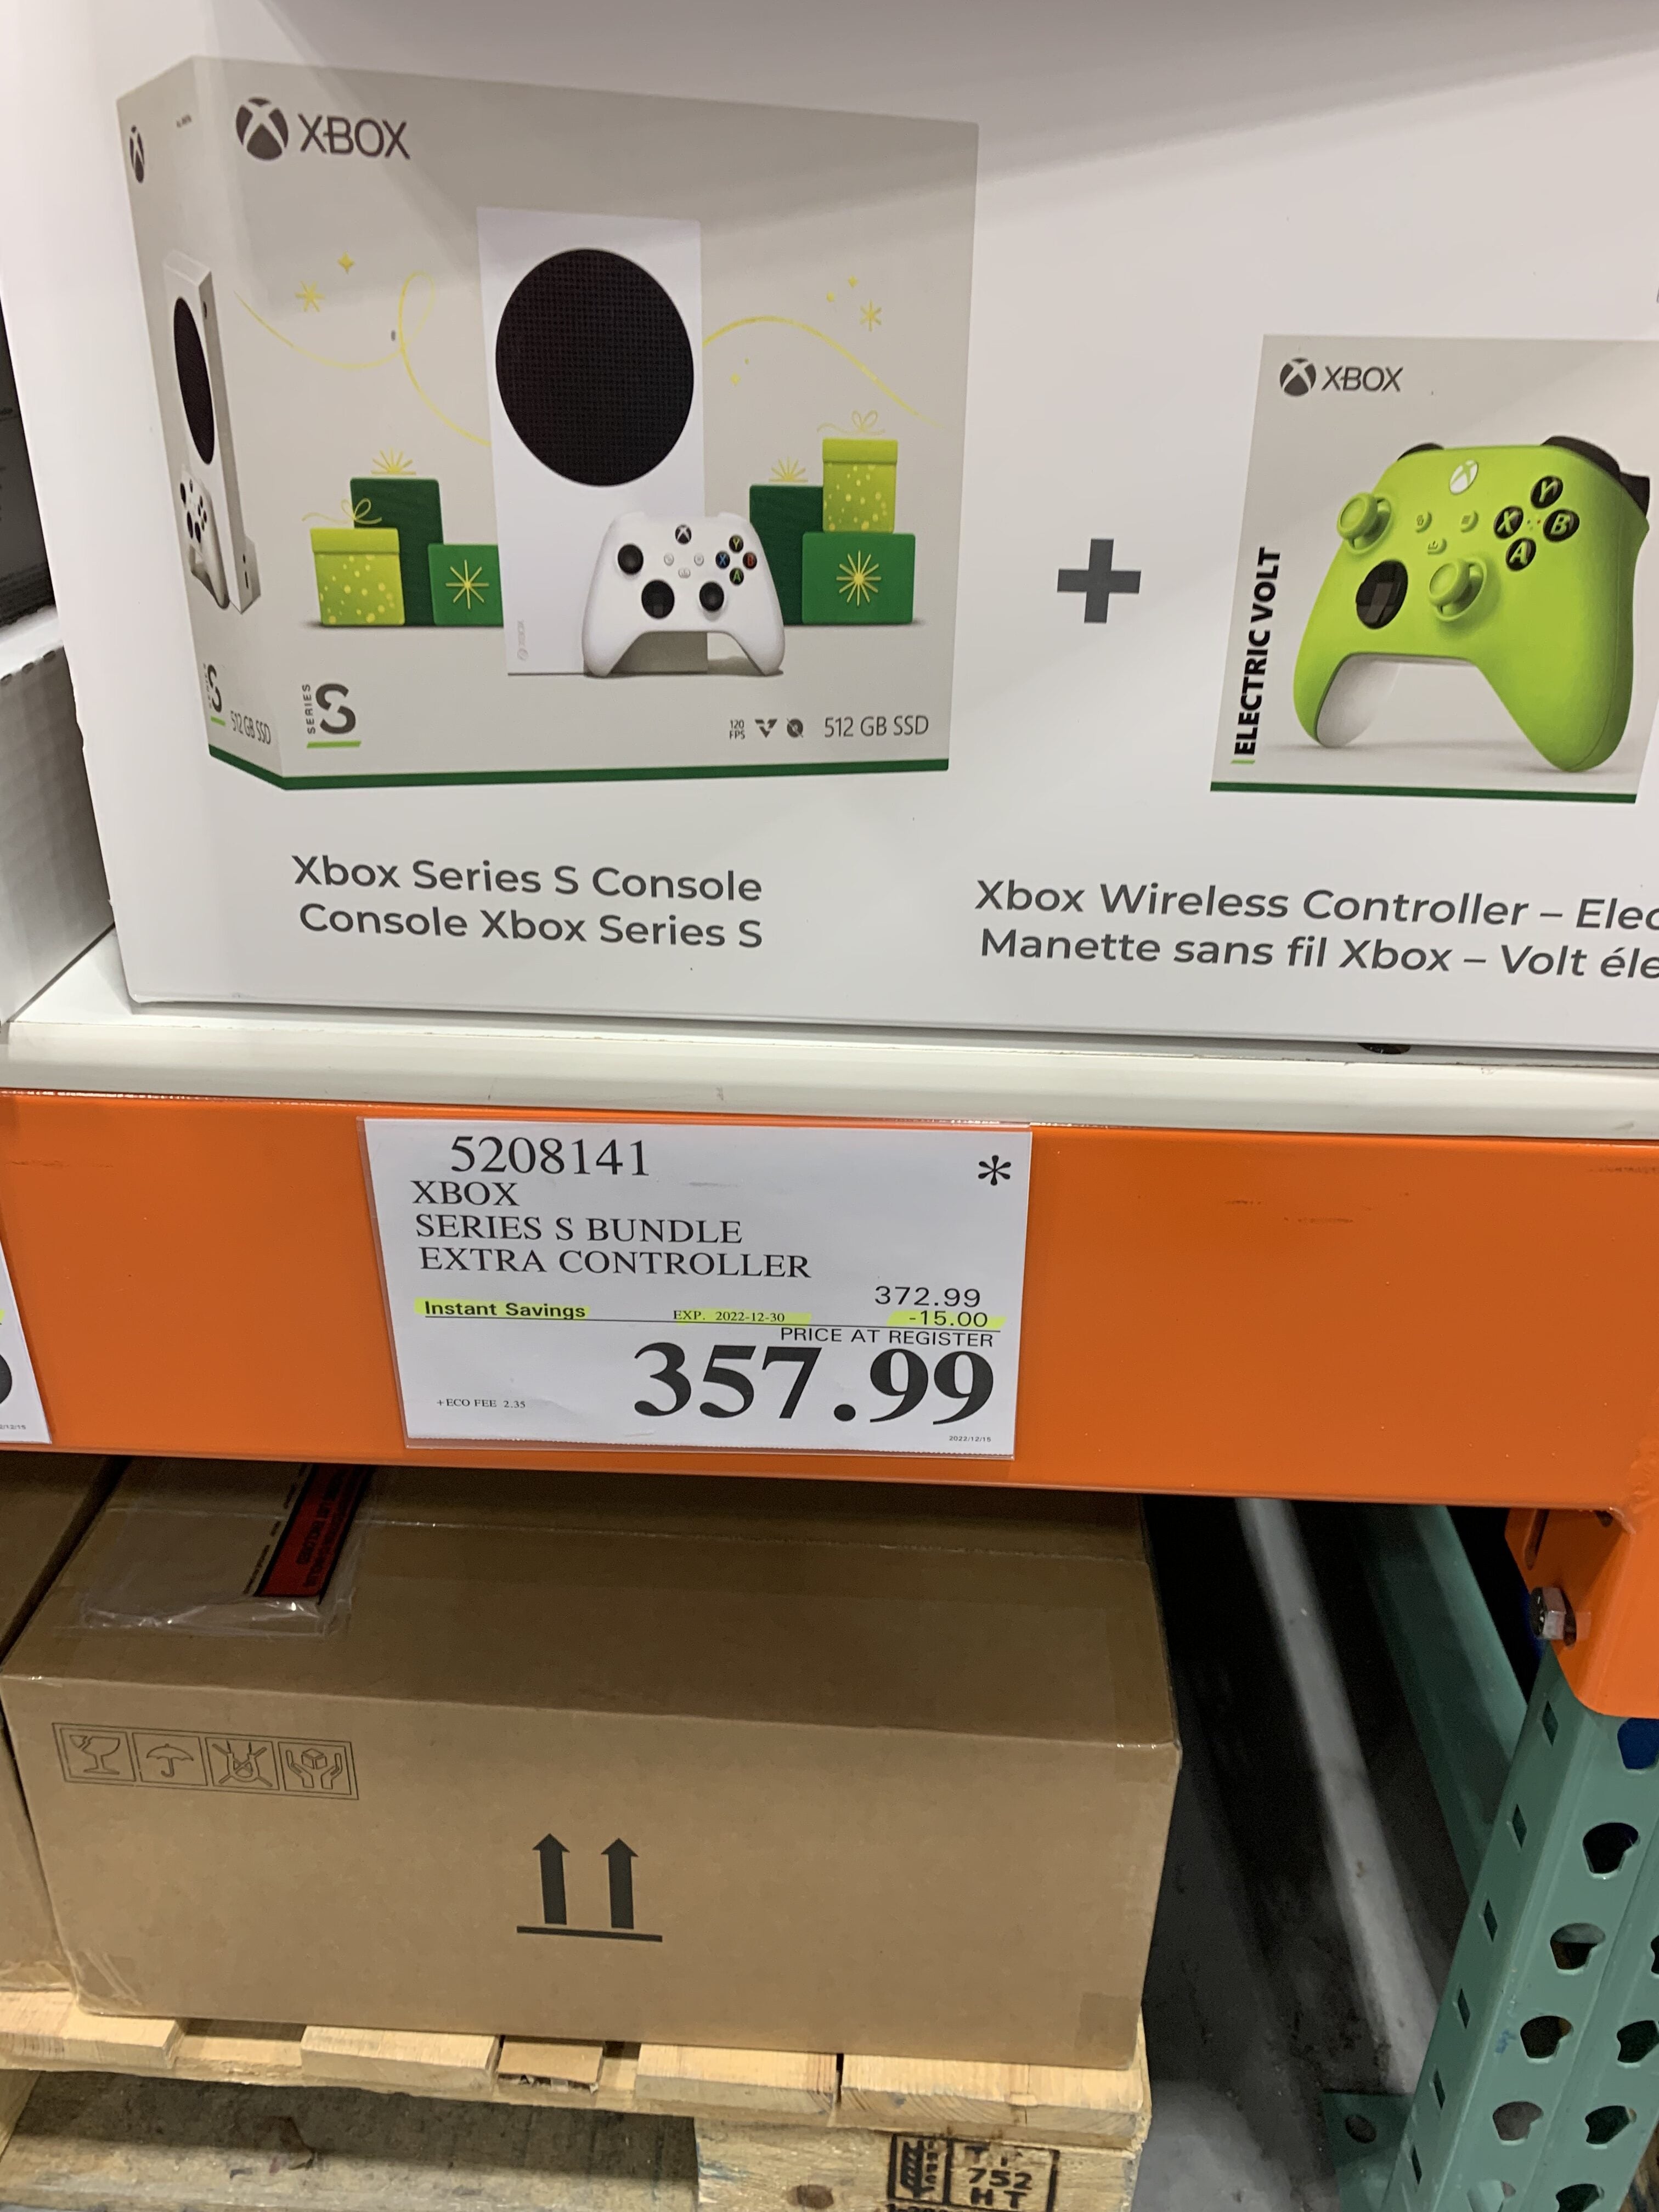 Costco ideas for holiday shopping - Xbox One S bundle